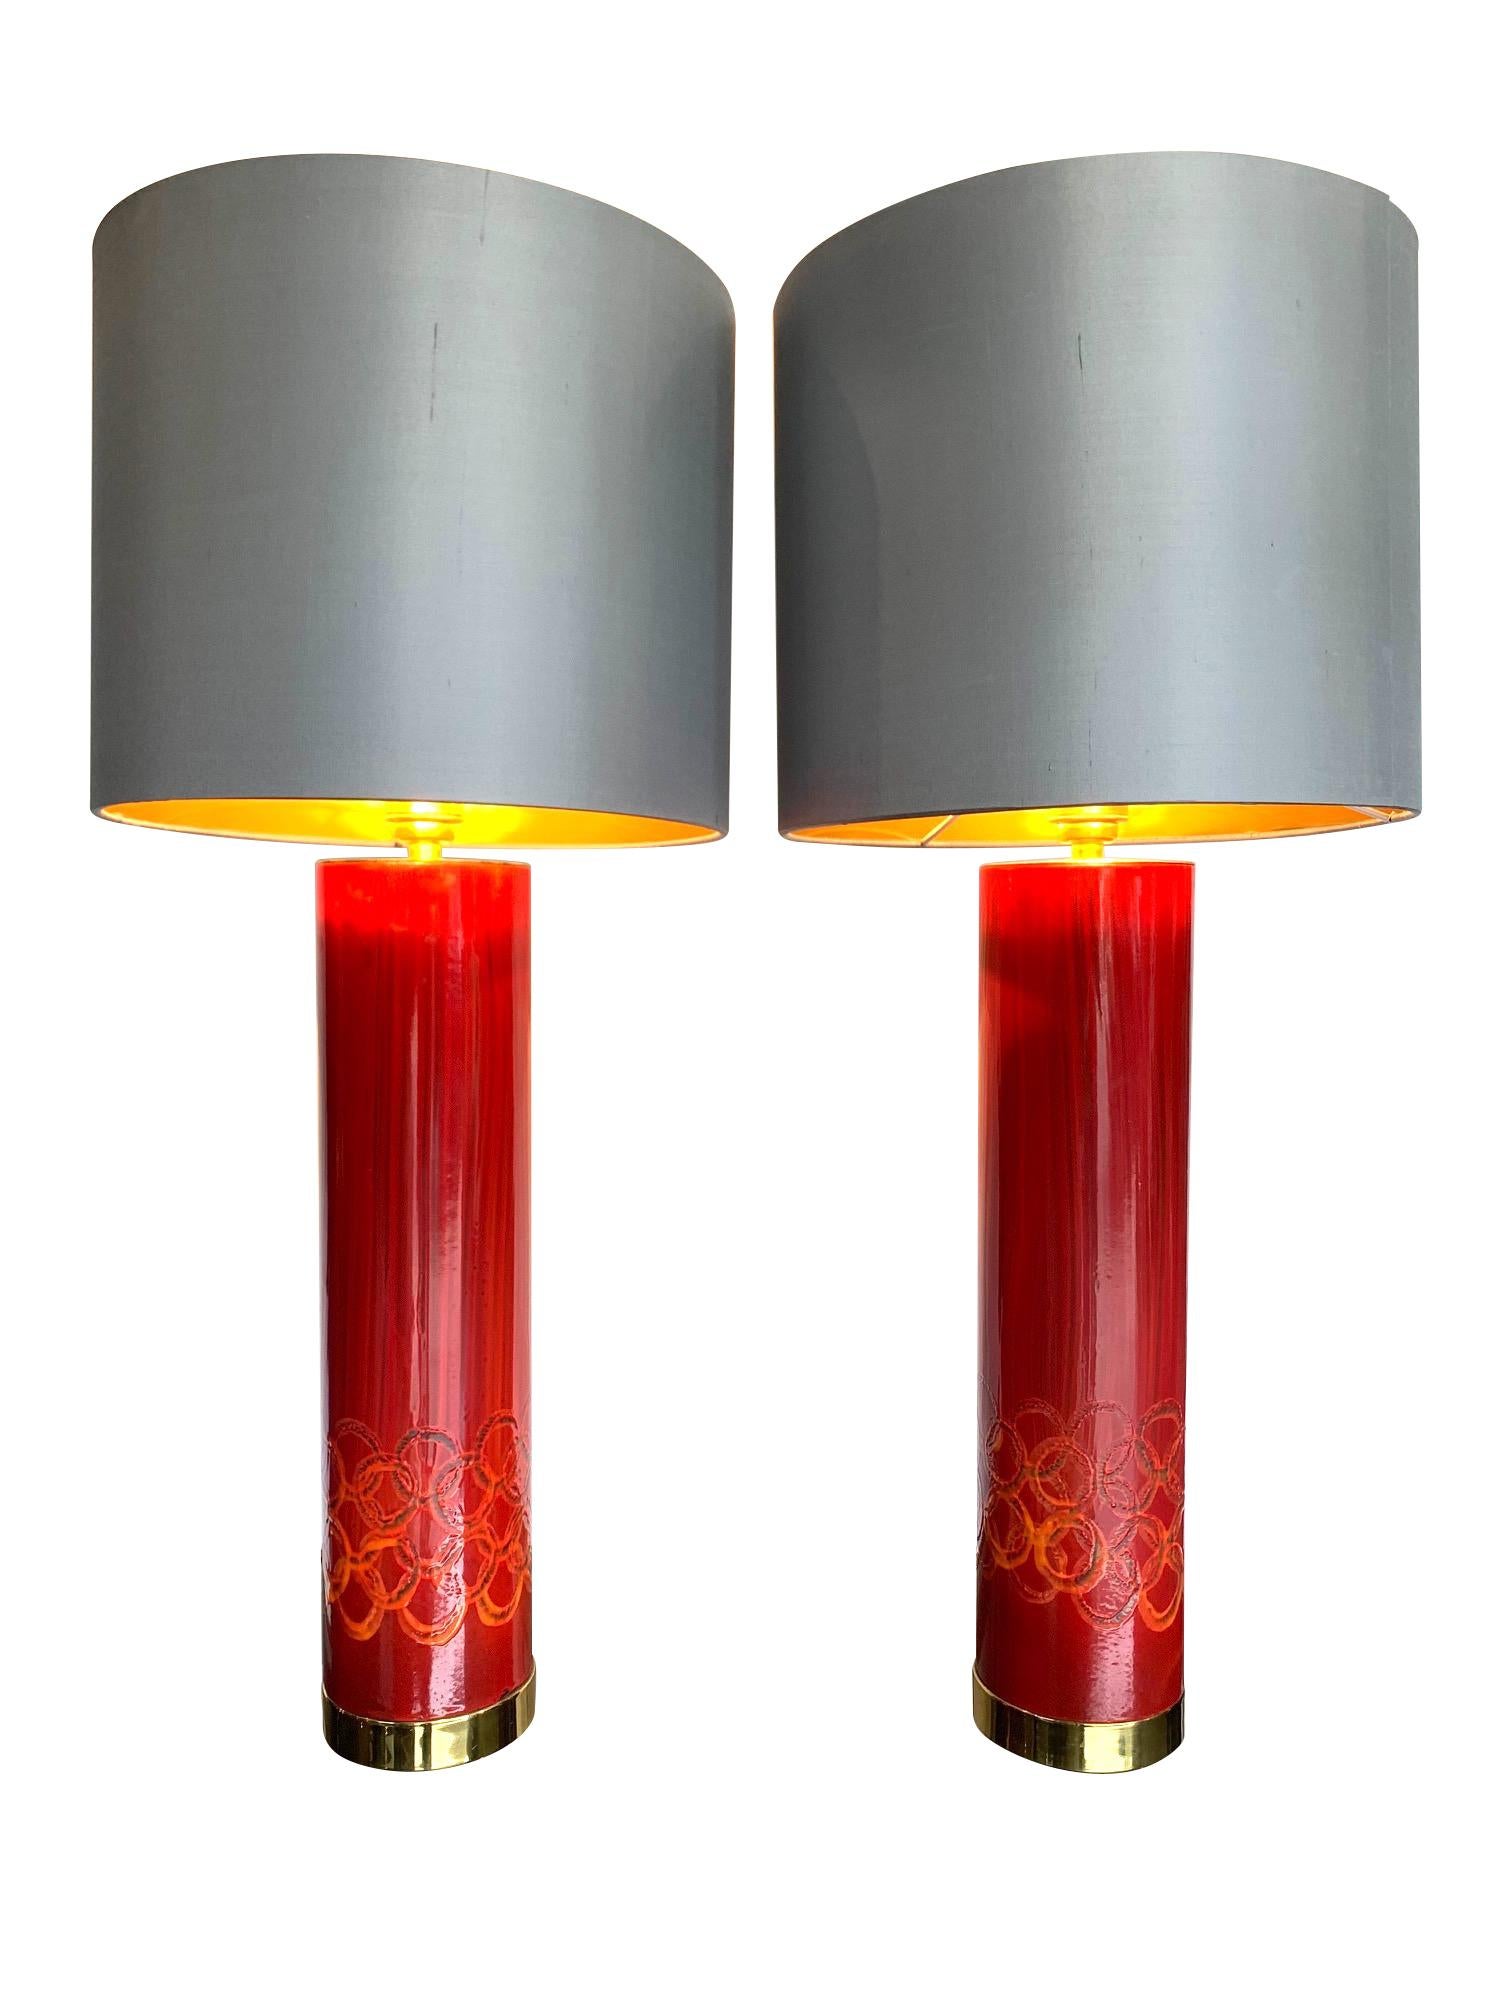 Lovely Pair of Swedish Red Ceramic Lamps Brass Fittings and New Bespoke Shades For Sale 3